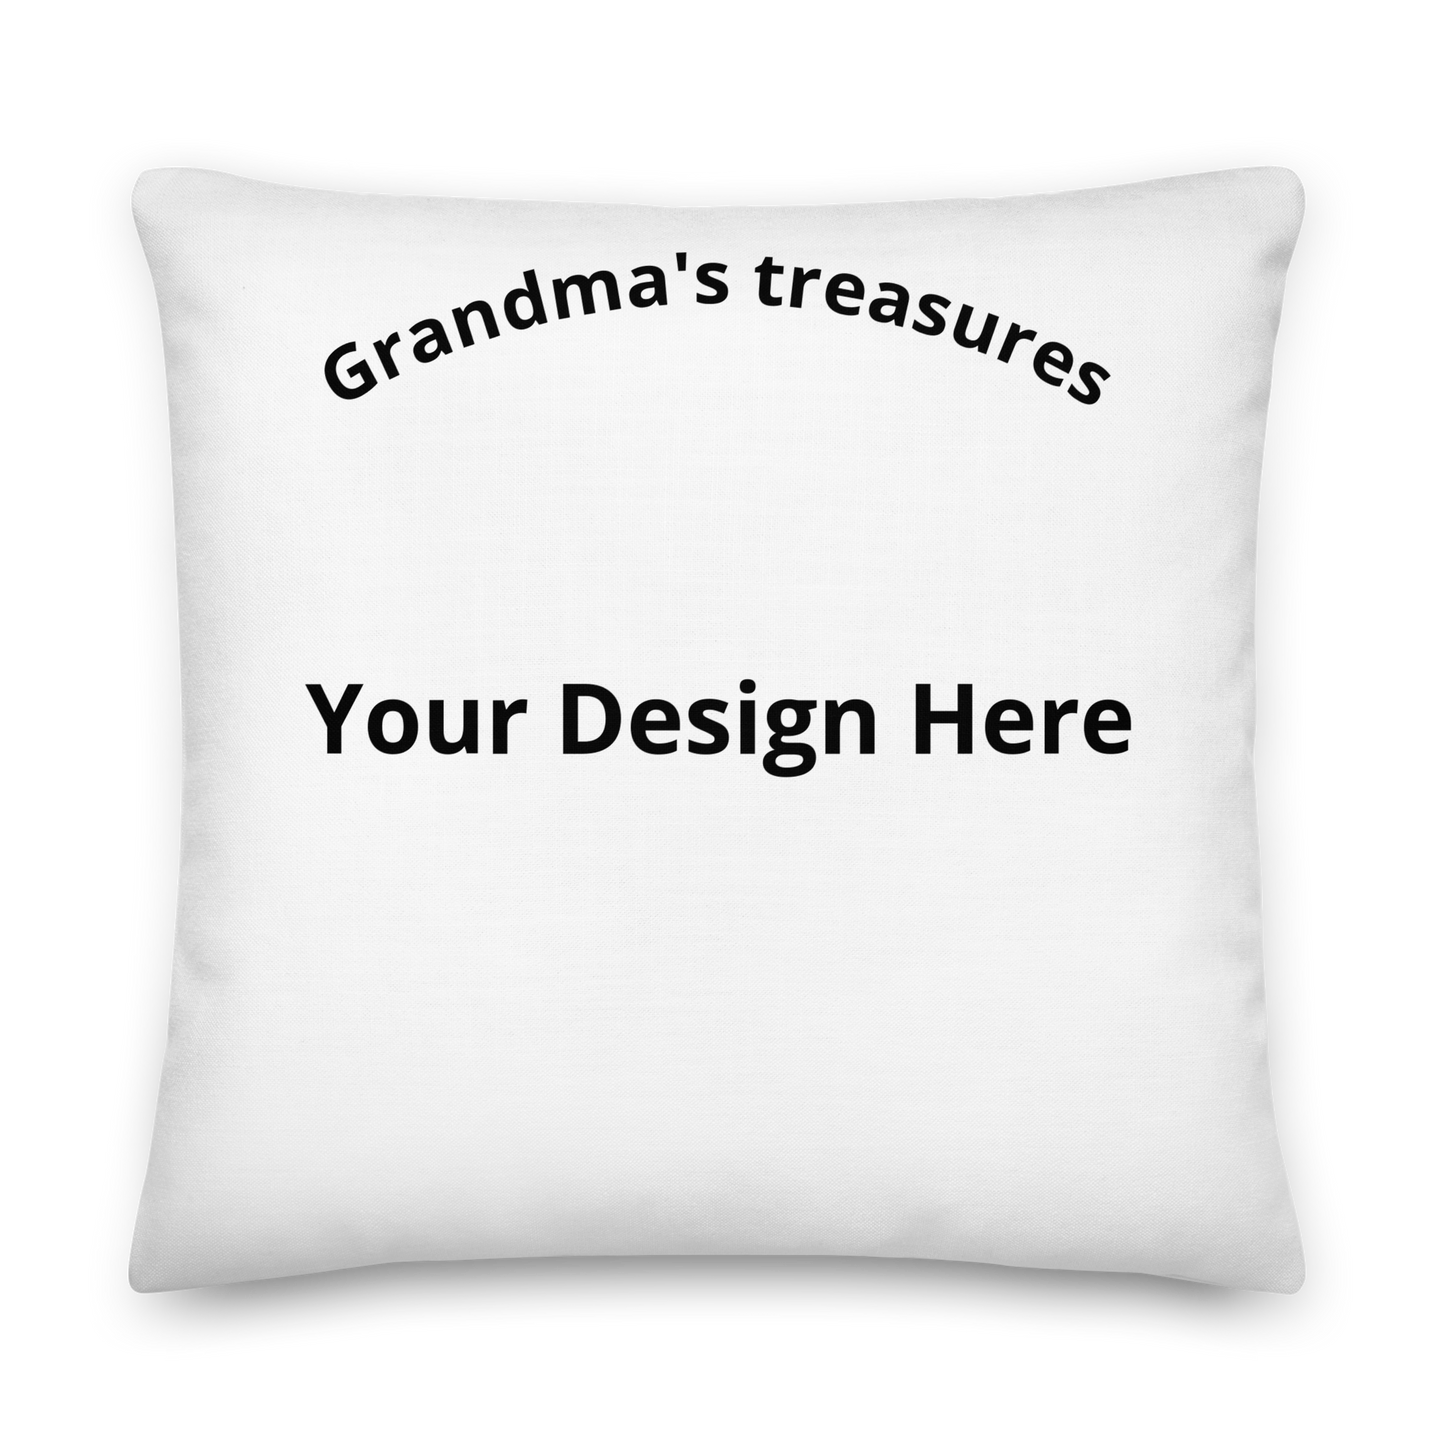 Personalized Photo Pillow for Grandma